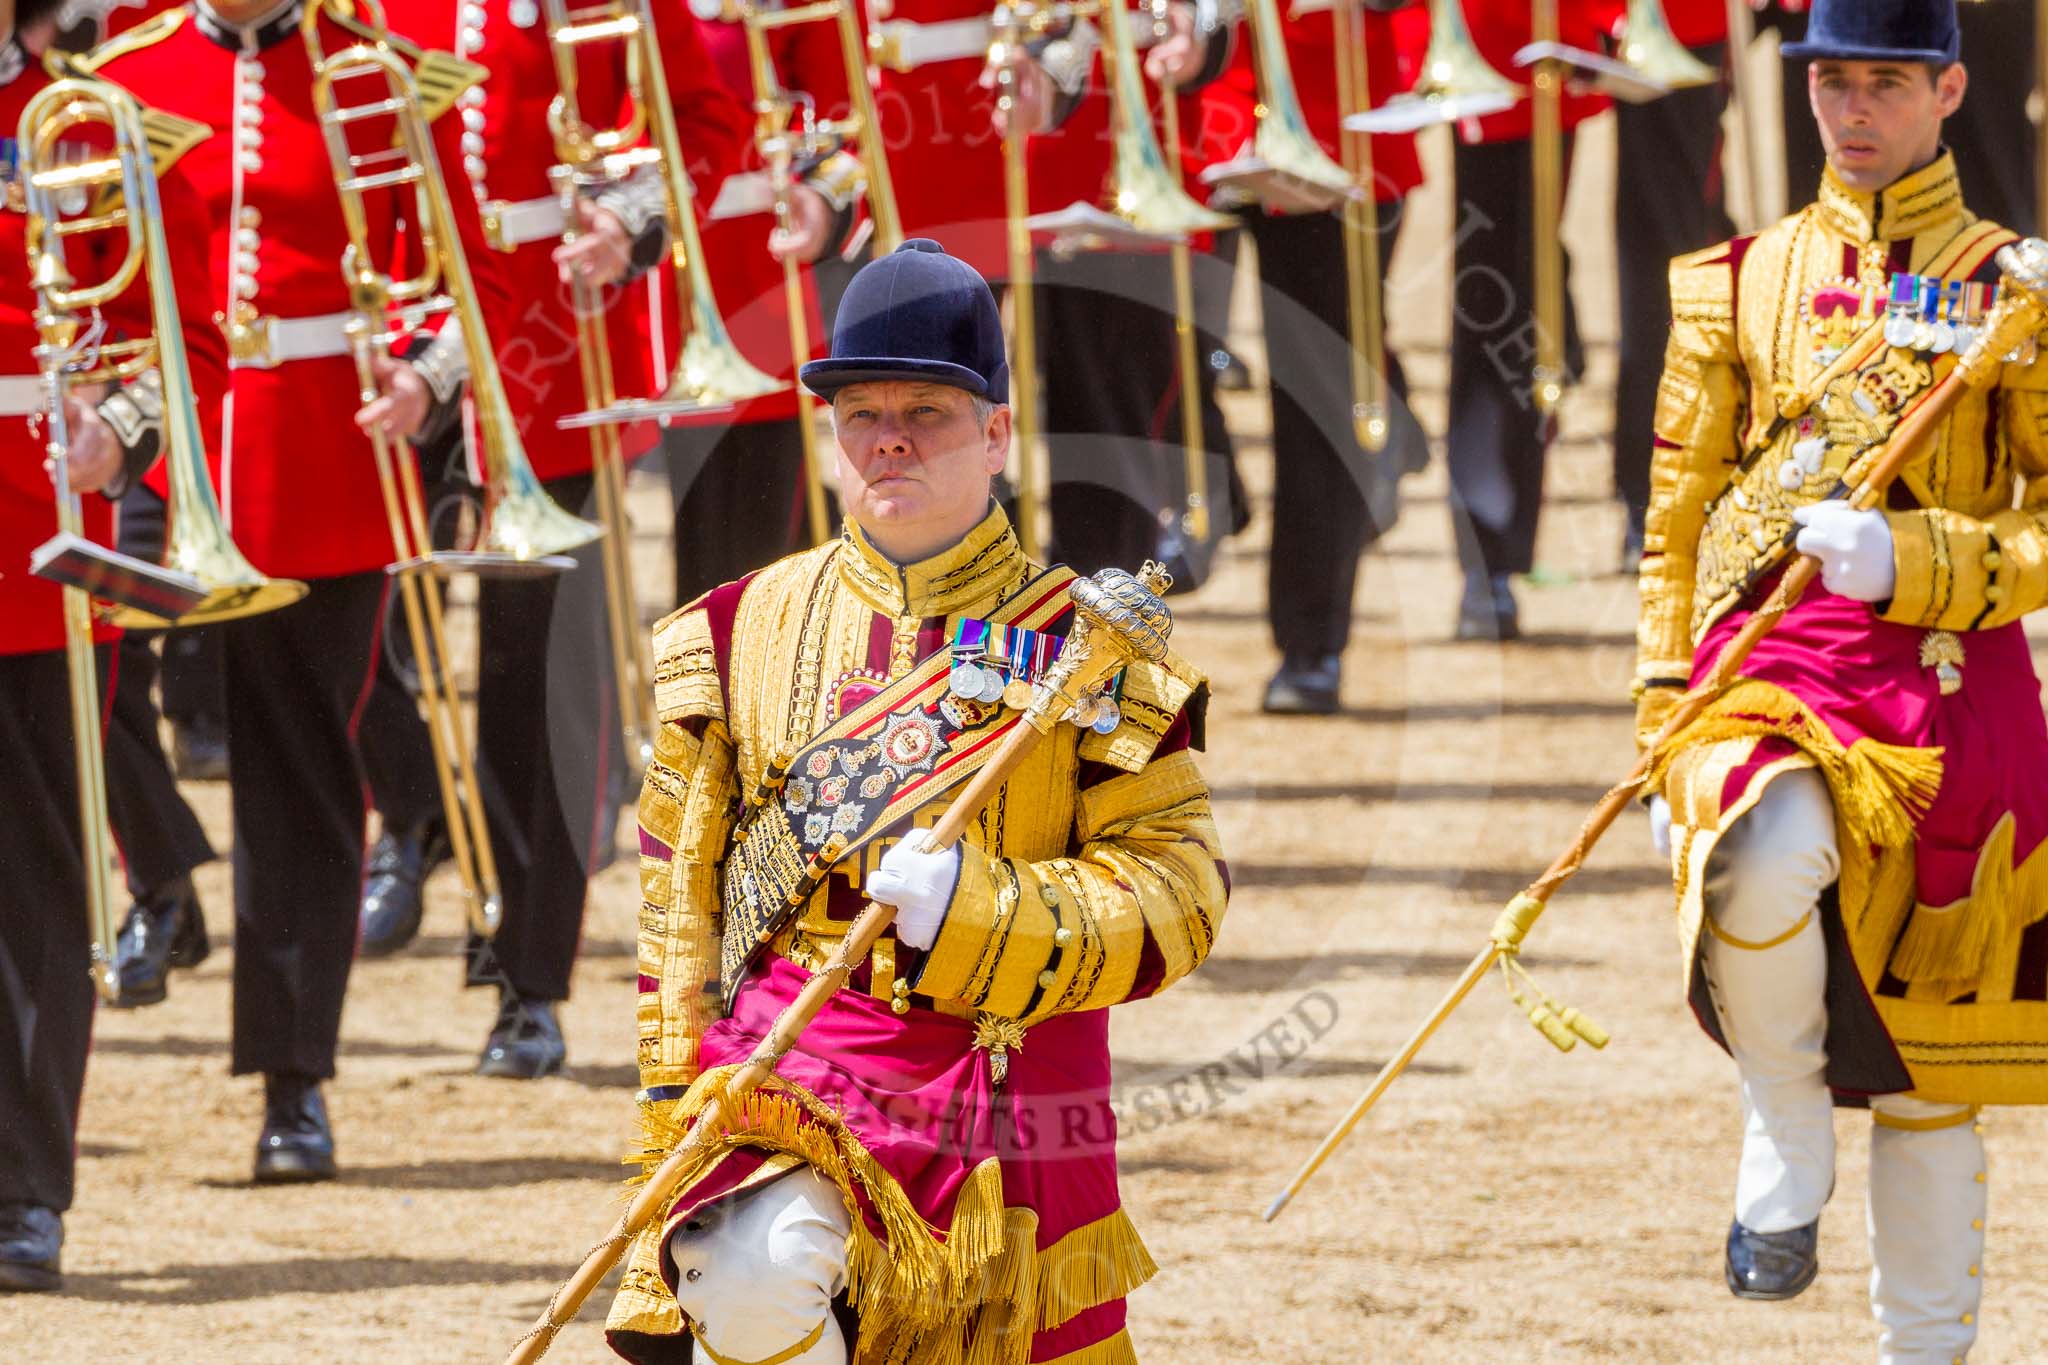 The Colonel's Review 2015.
Horse Guards Parade, Westminster,
London,

United Kingdom,
on 06 June 2015 at 11:50, image #457